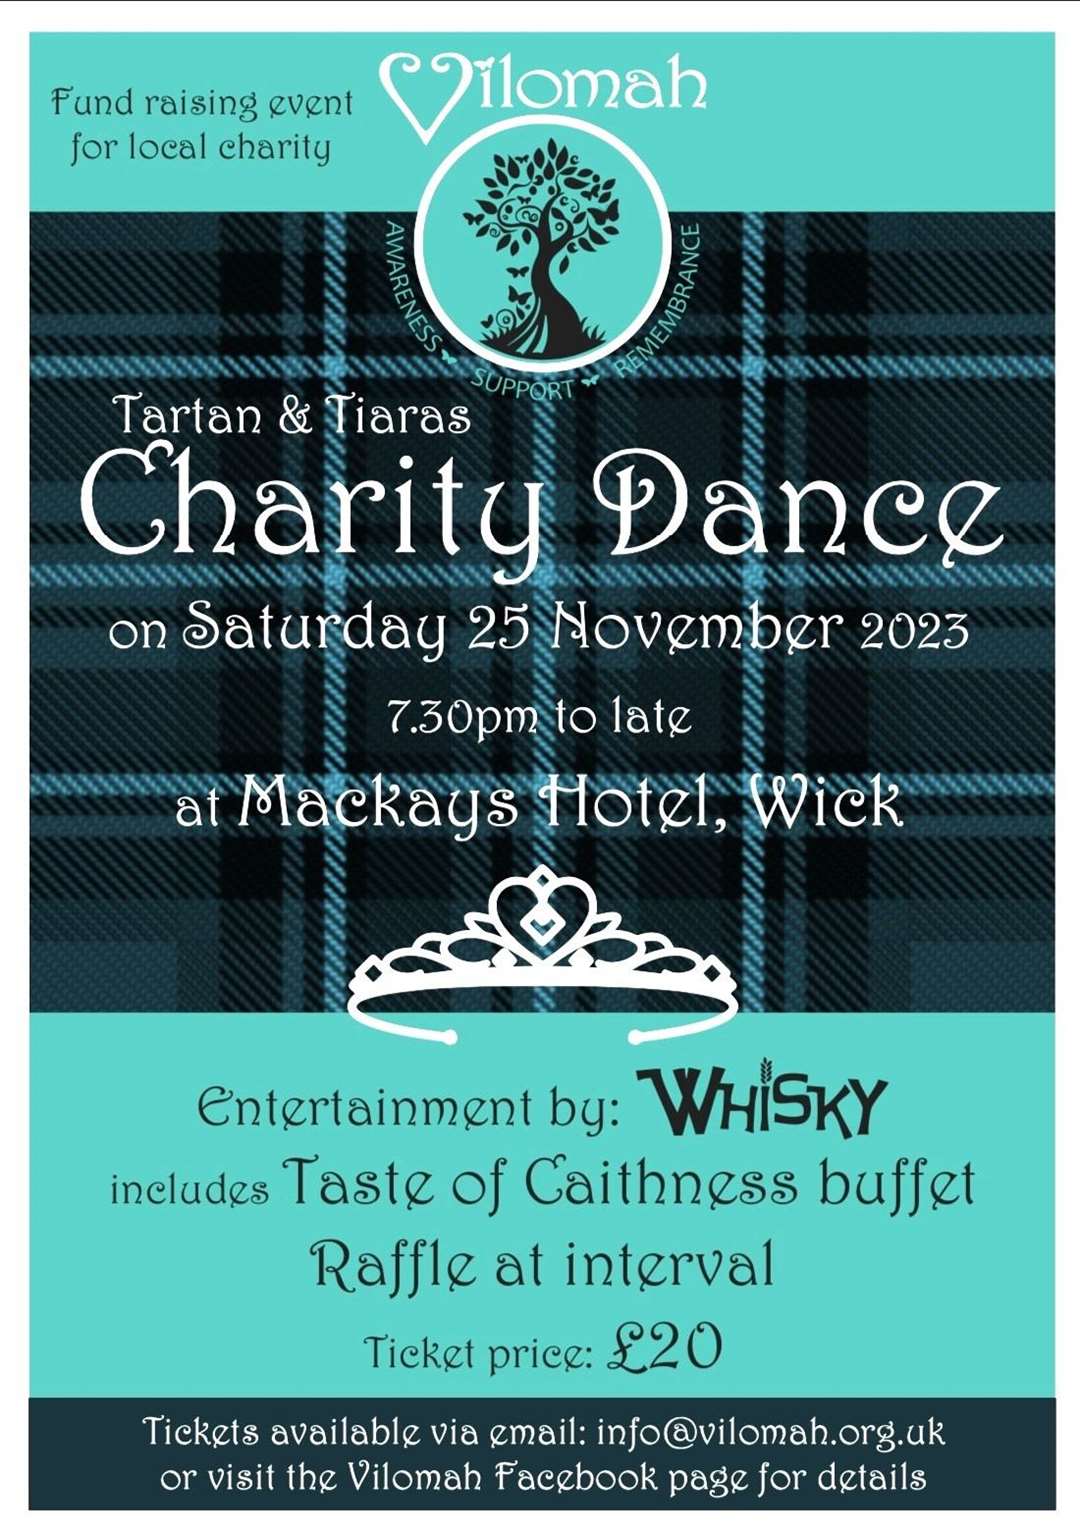 Charity dance poster.